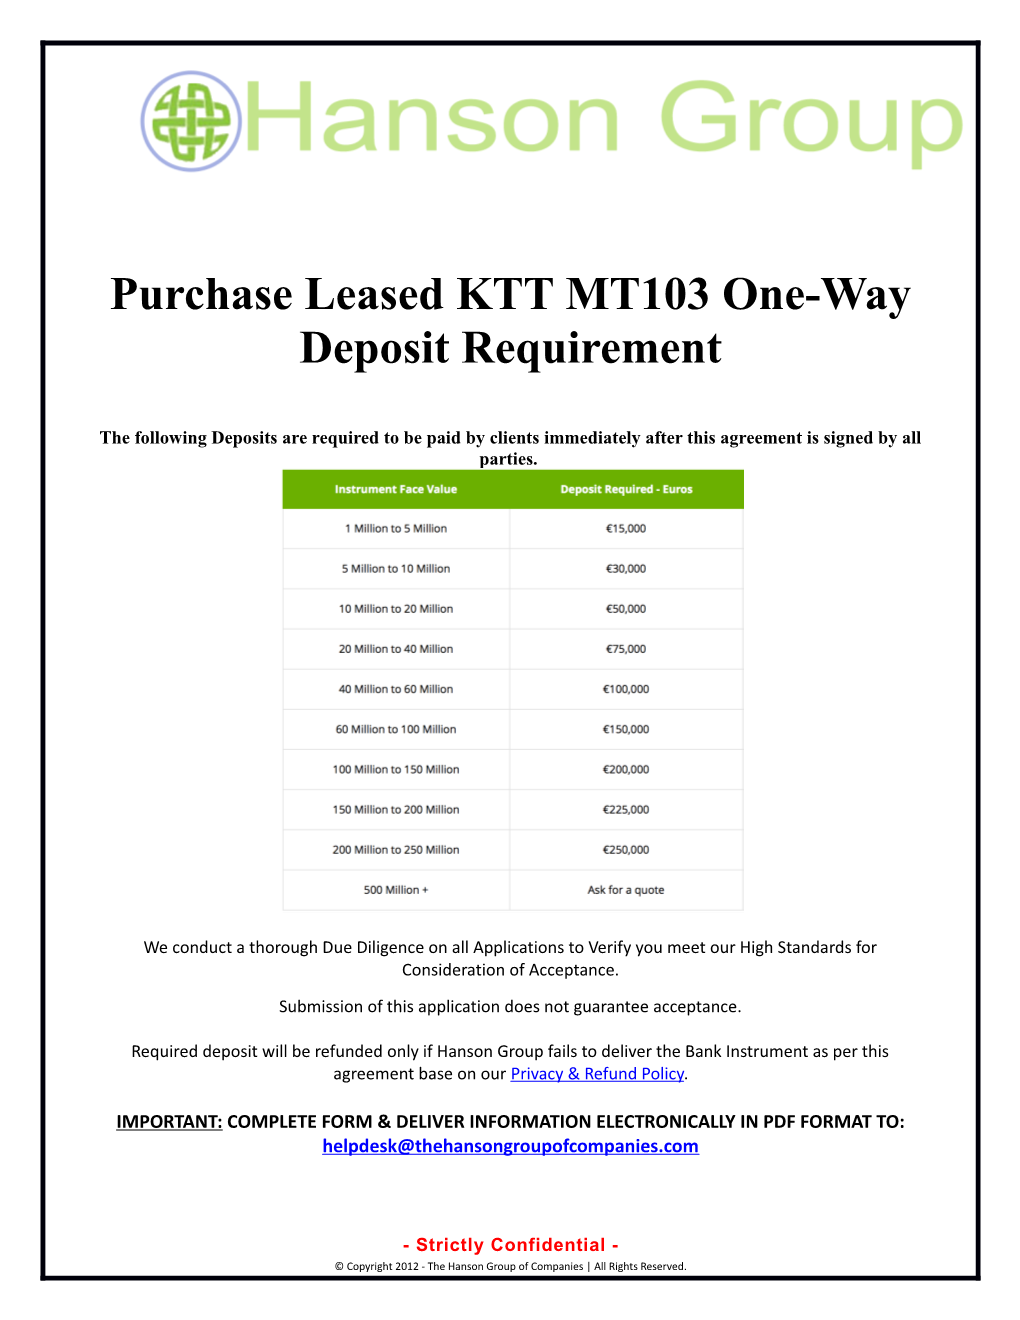 Purchase Leased KTT MT103 One-Way Deposit Requirement